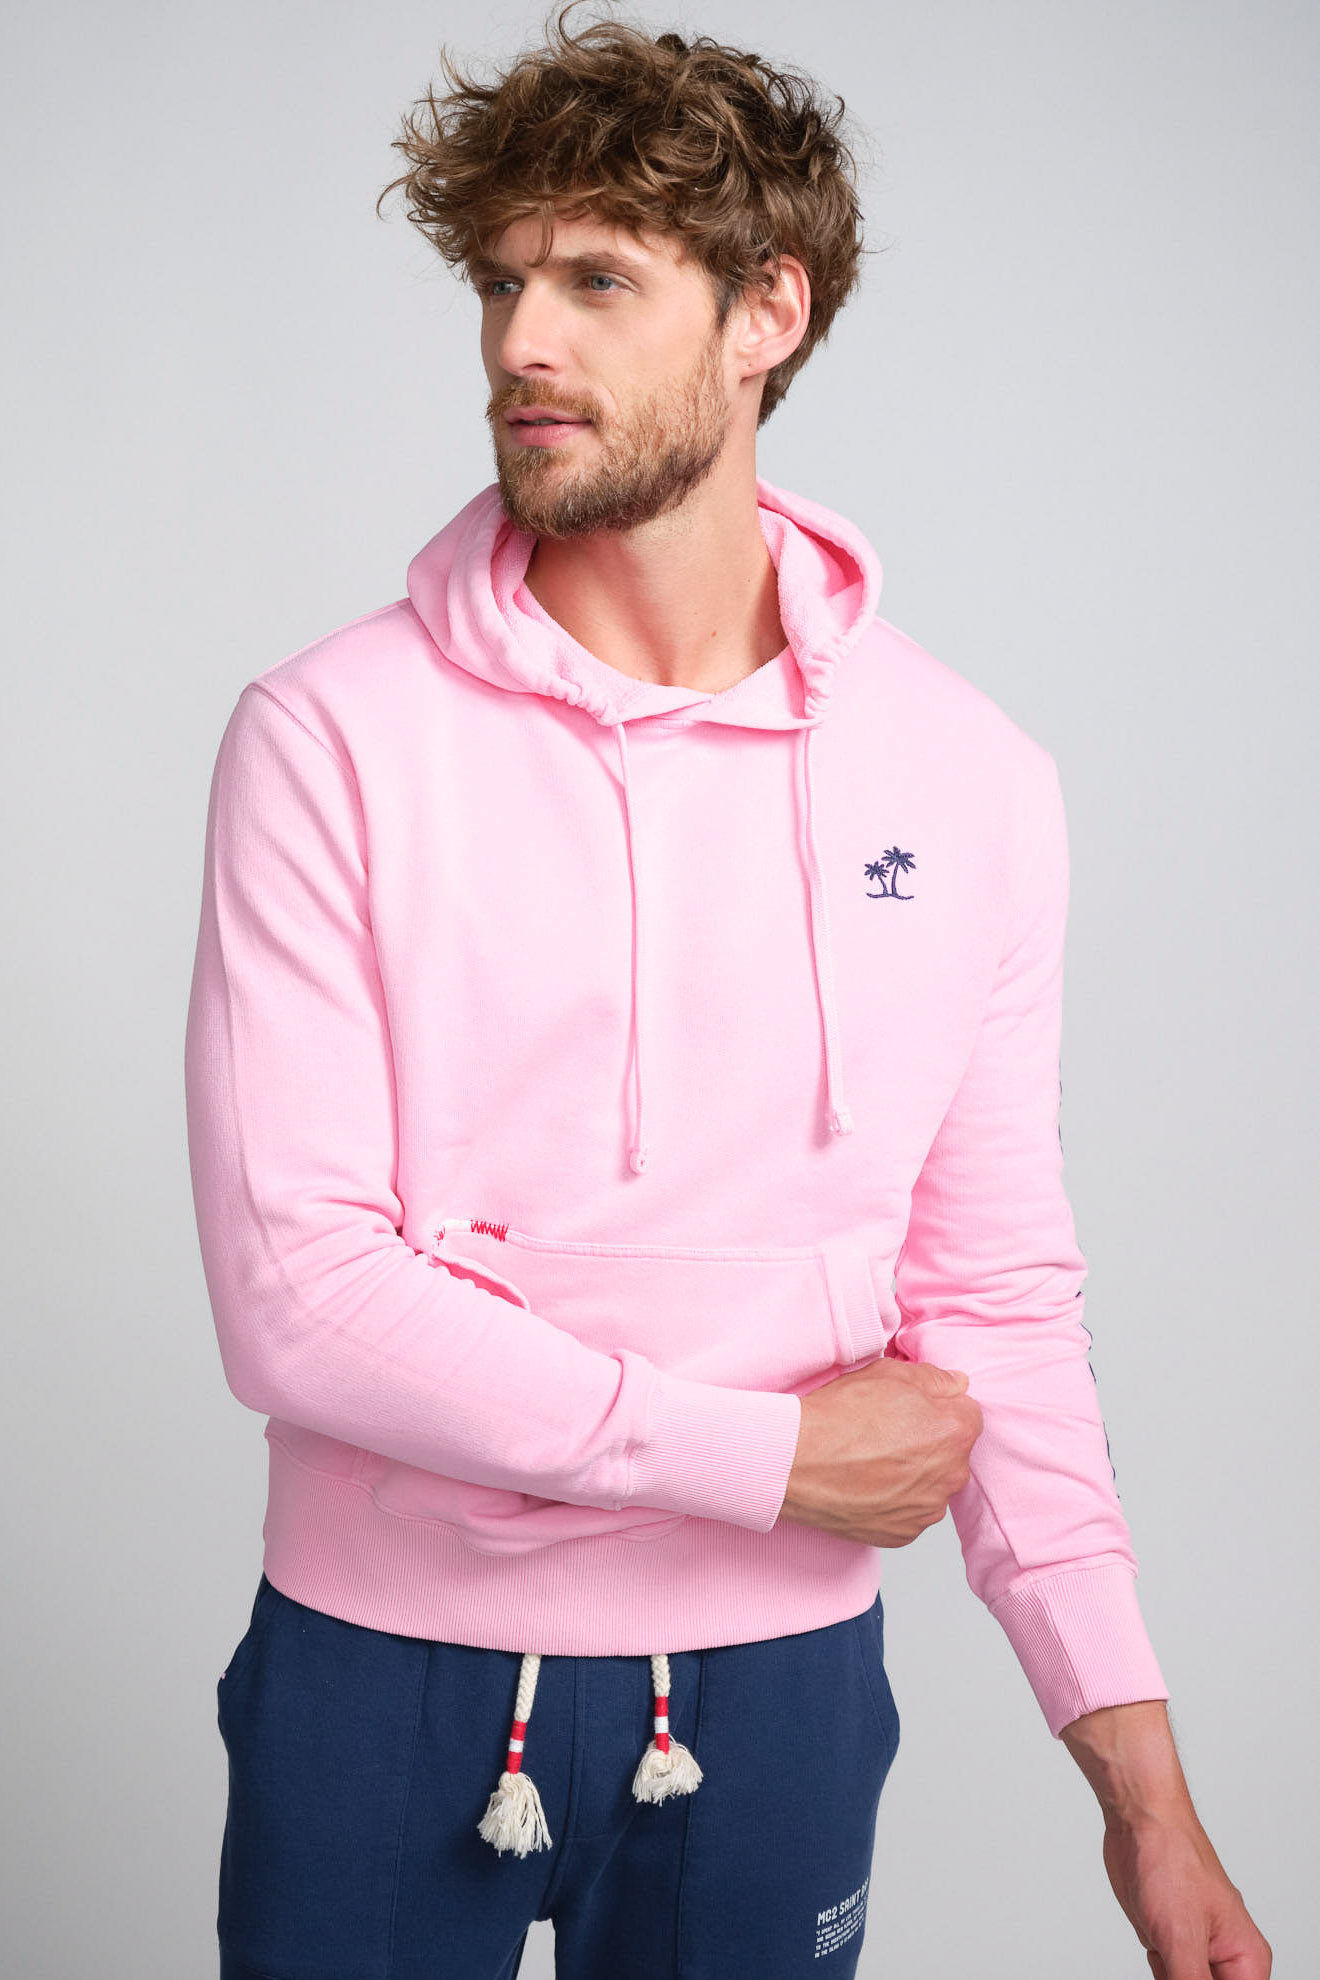 st.barth hoodie pink branded cotton model front